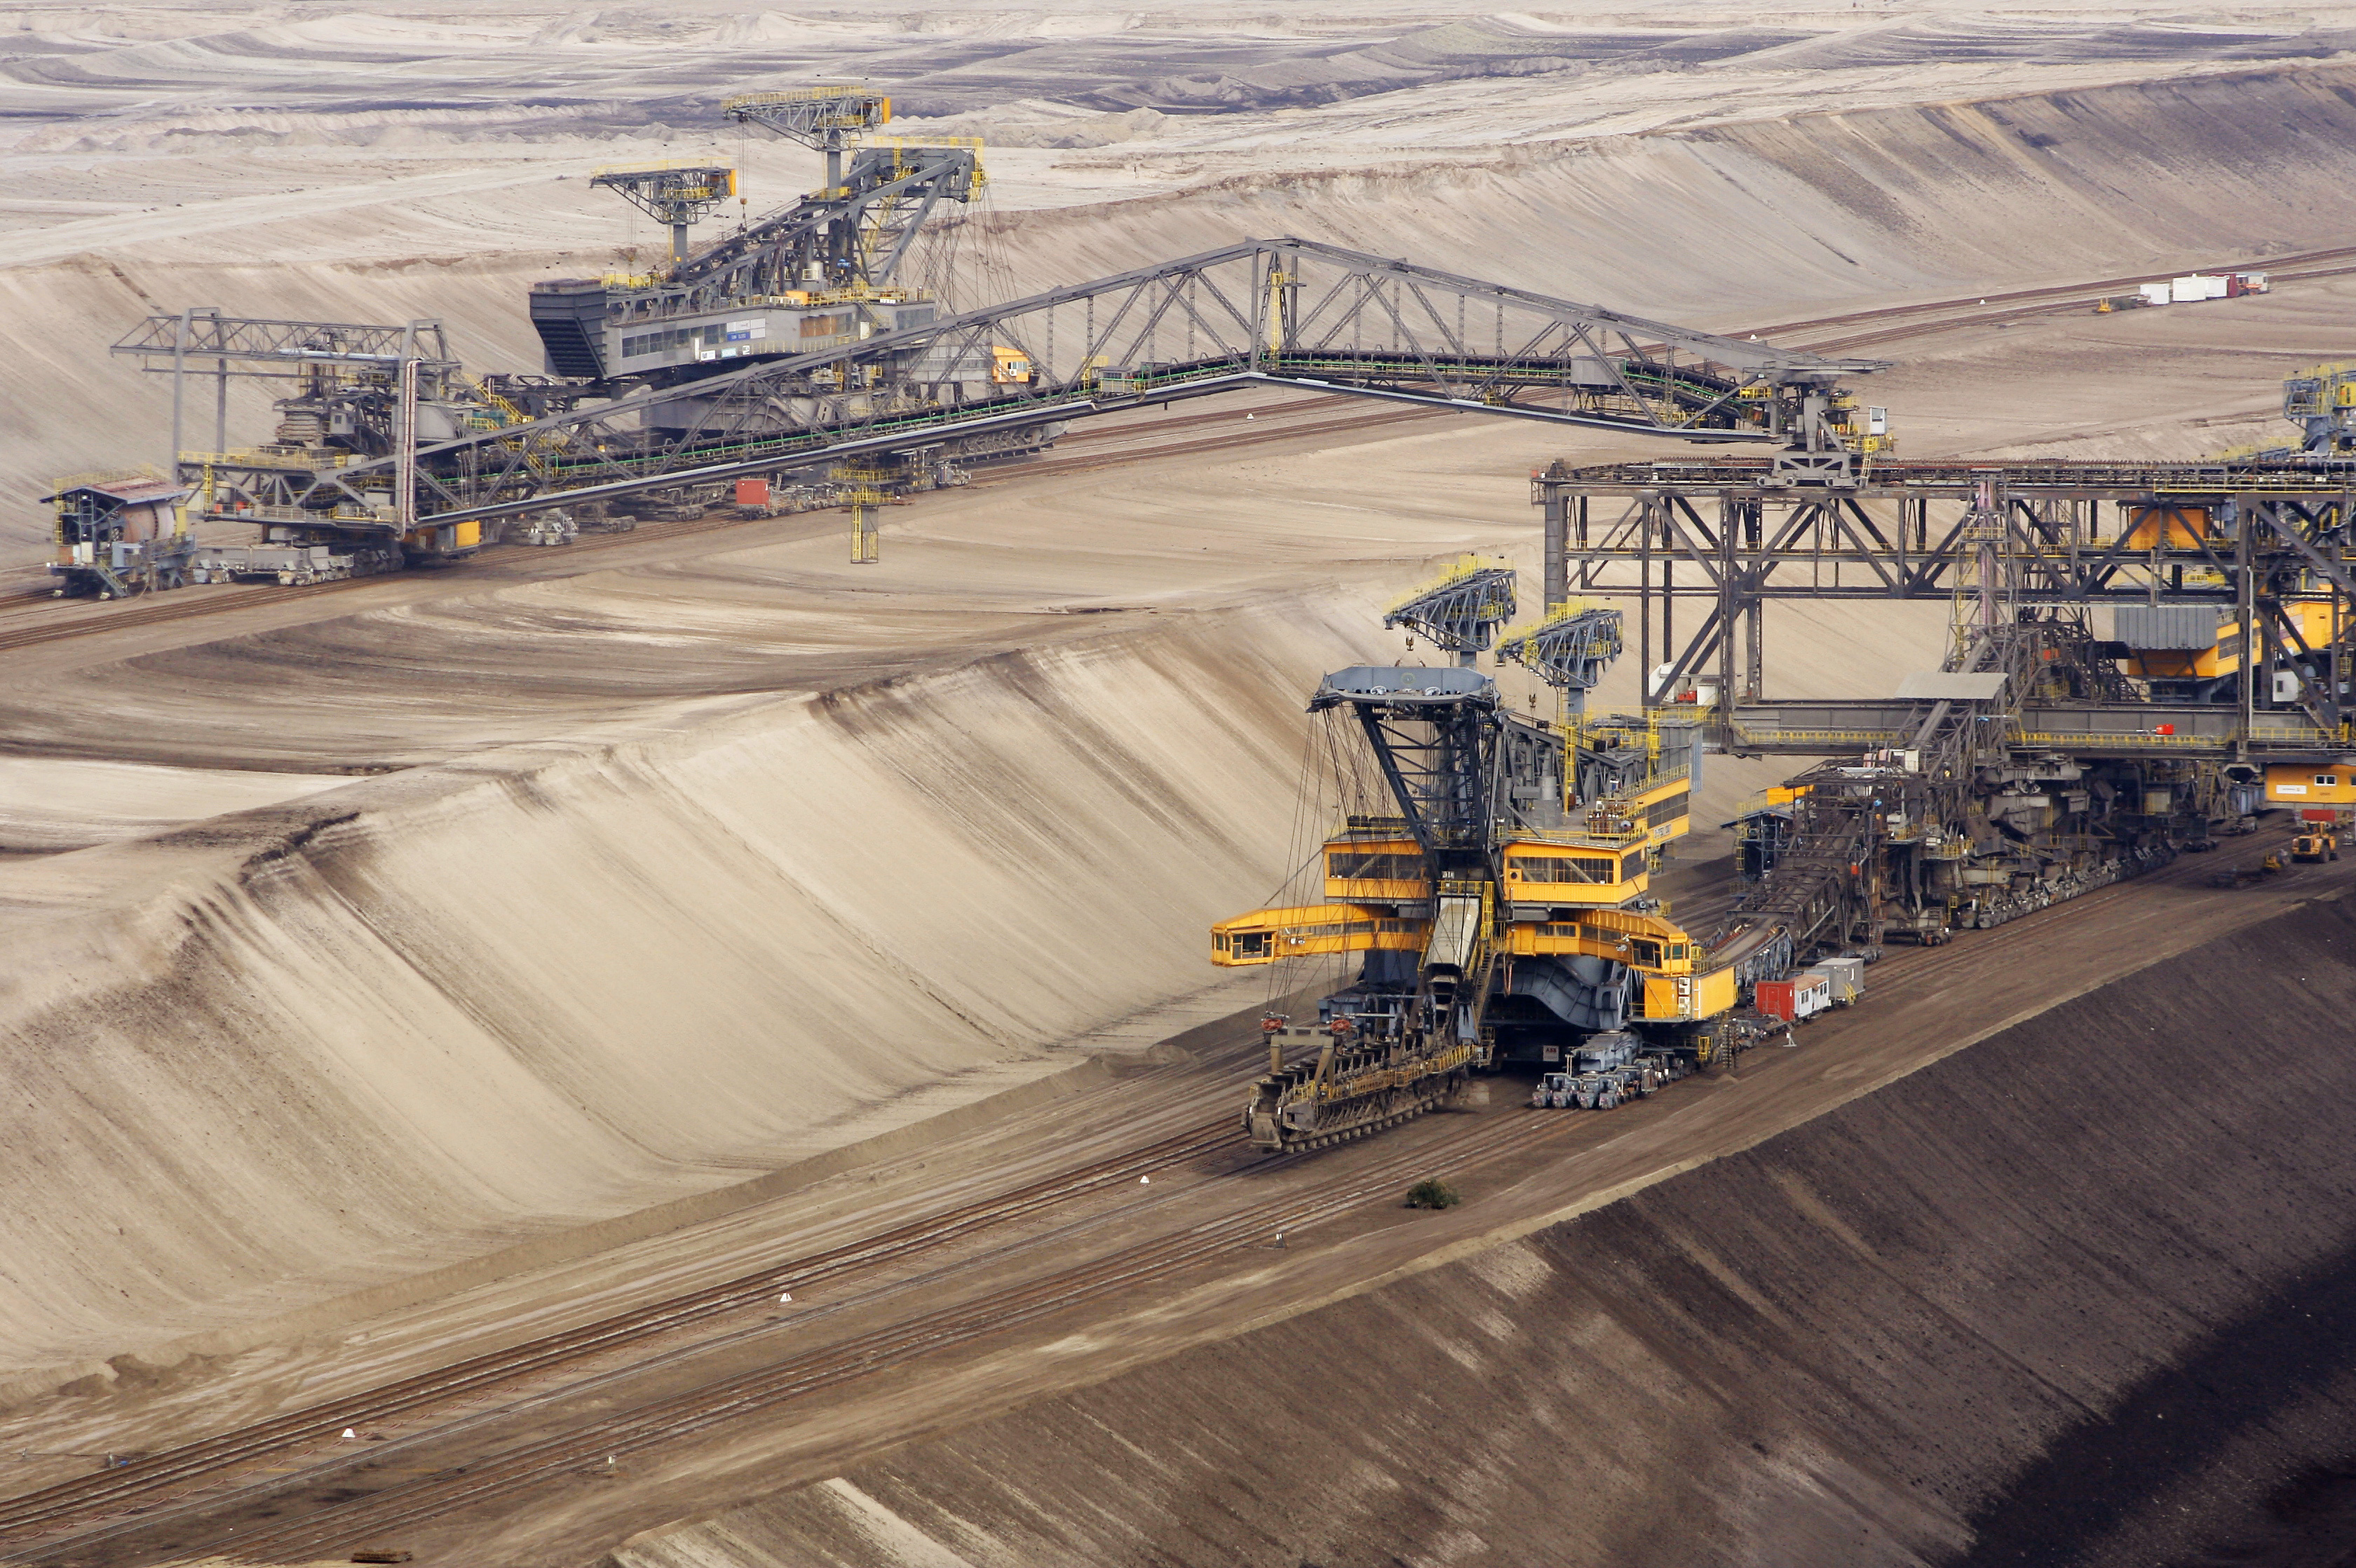 Opencast mining with large machines